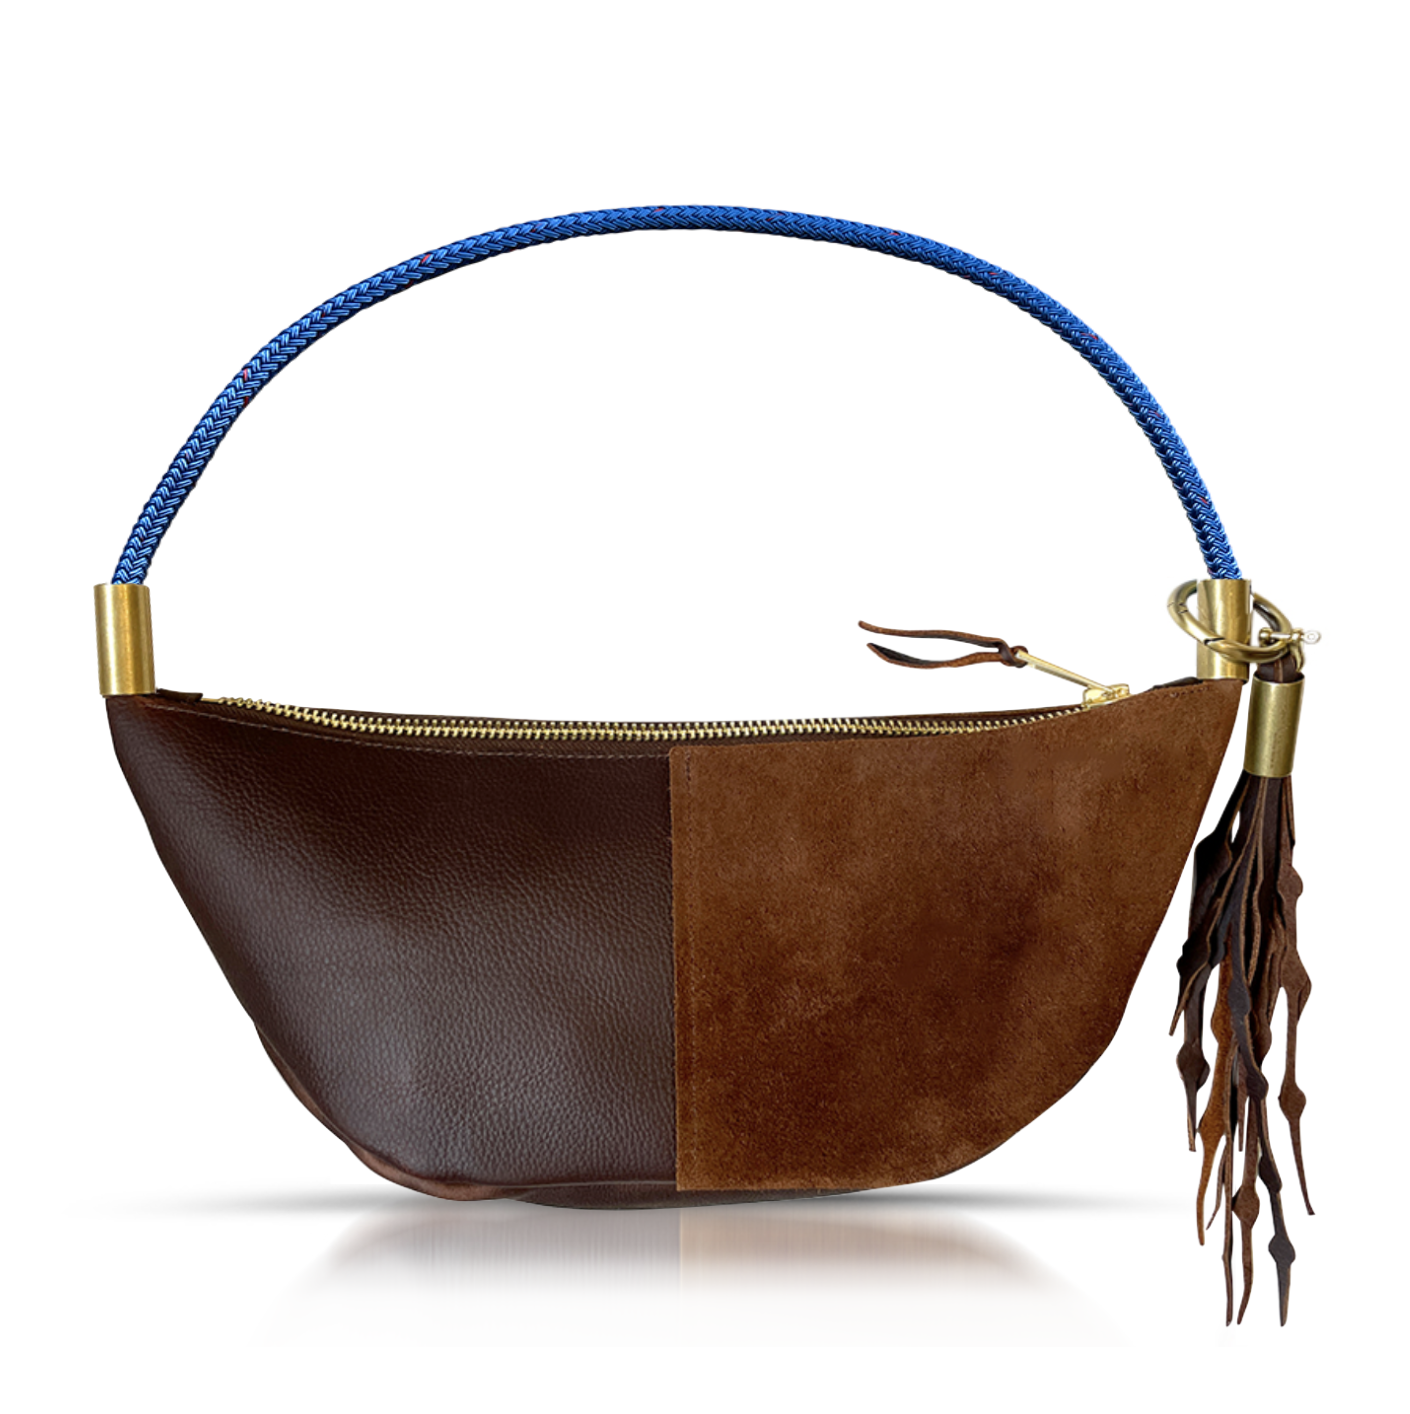 brown leather sling bag with blue dock line